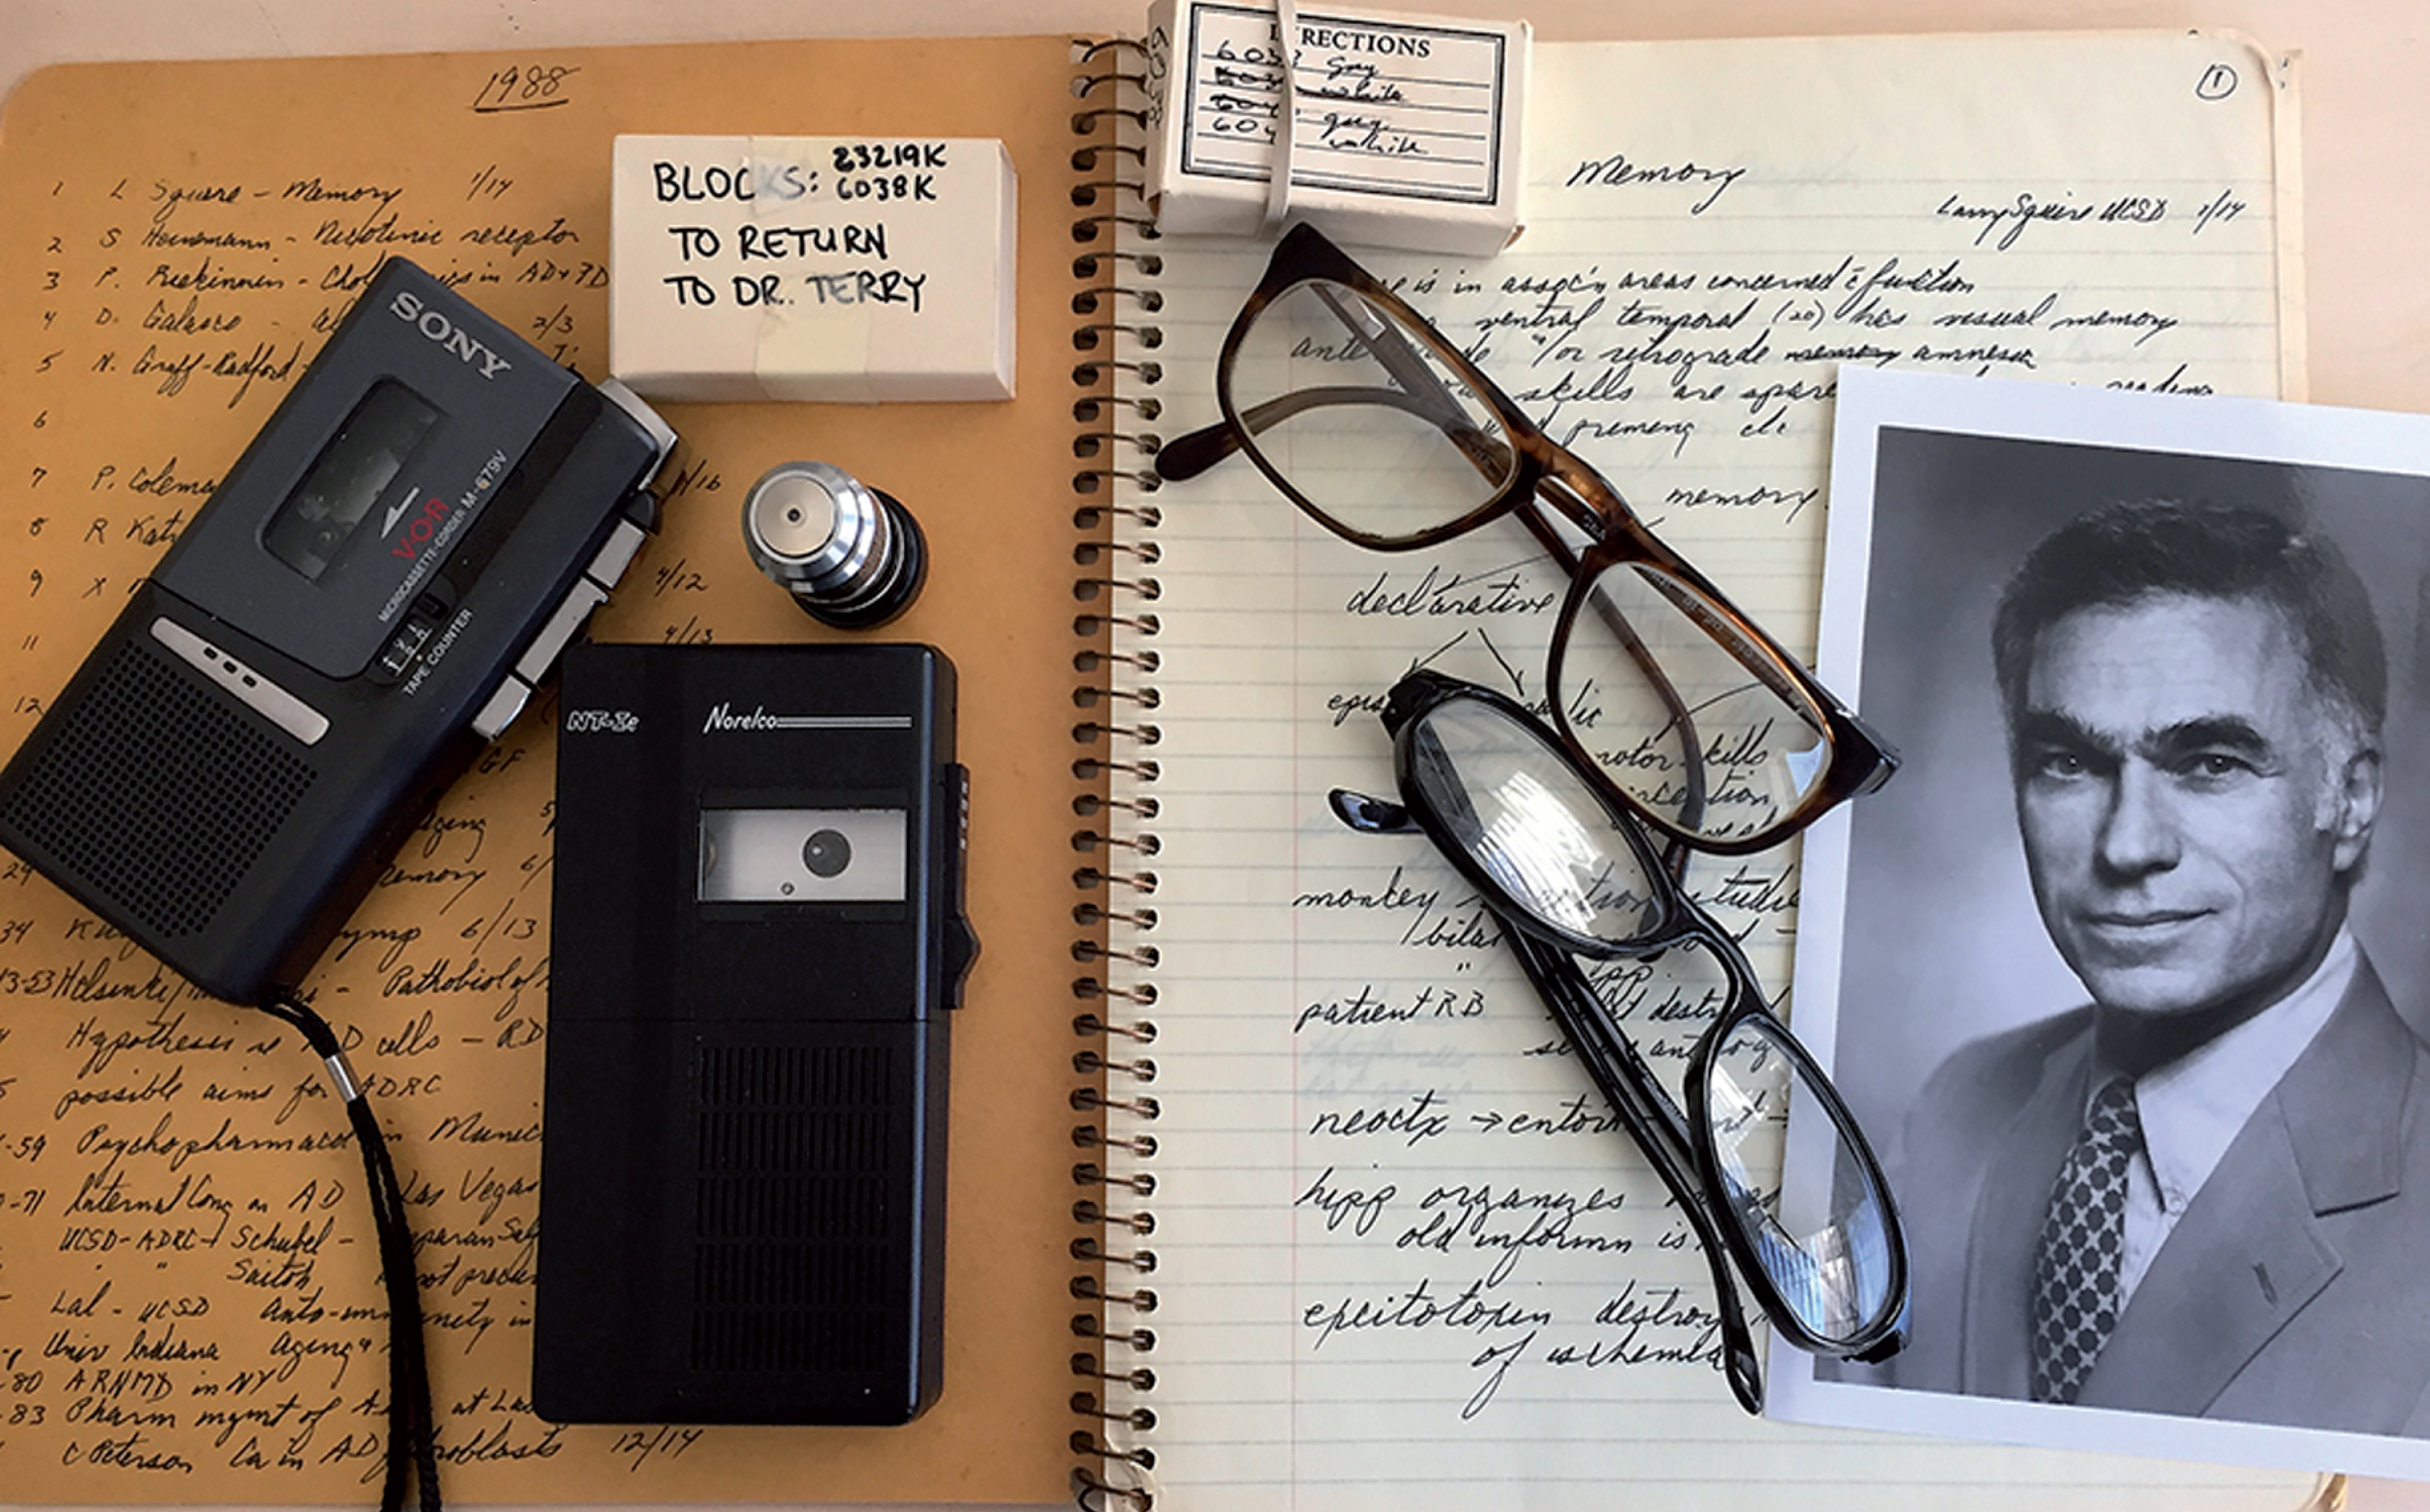 Some memorabilia from Bob Terry’s office at UCSD. His notebook, tape recorders, glasses, epon blocks for electron microscopy of Alzheimer’s disease brain biopsies from where the images of paired helical filaments were obtained, and a picture of him at his time at the Albert Einstein College of Medicine.